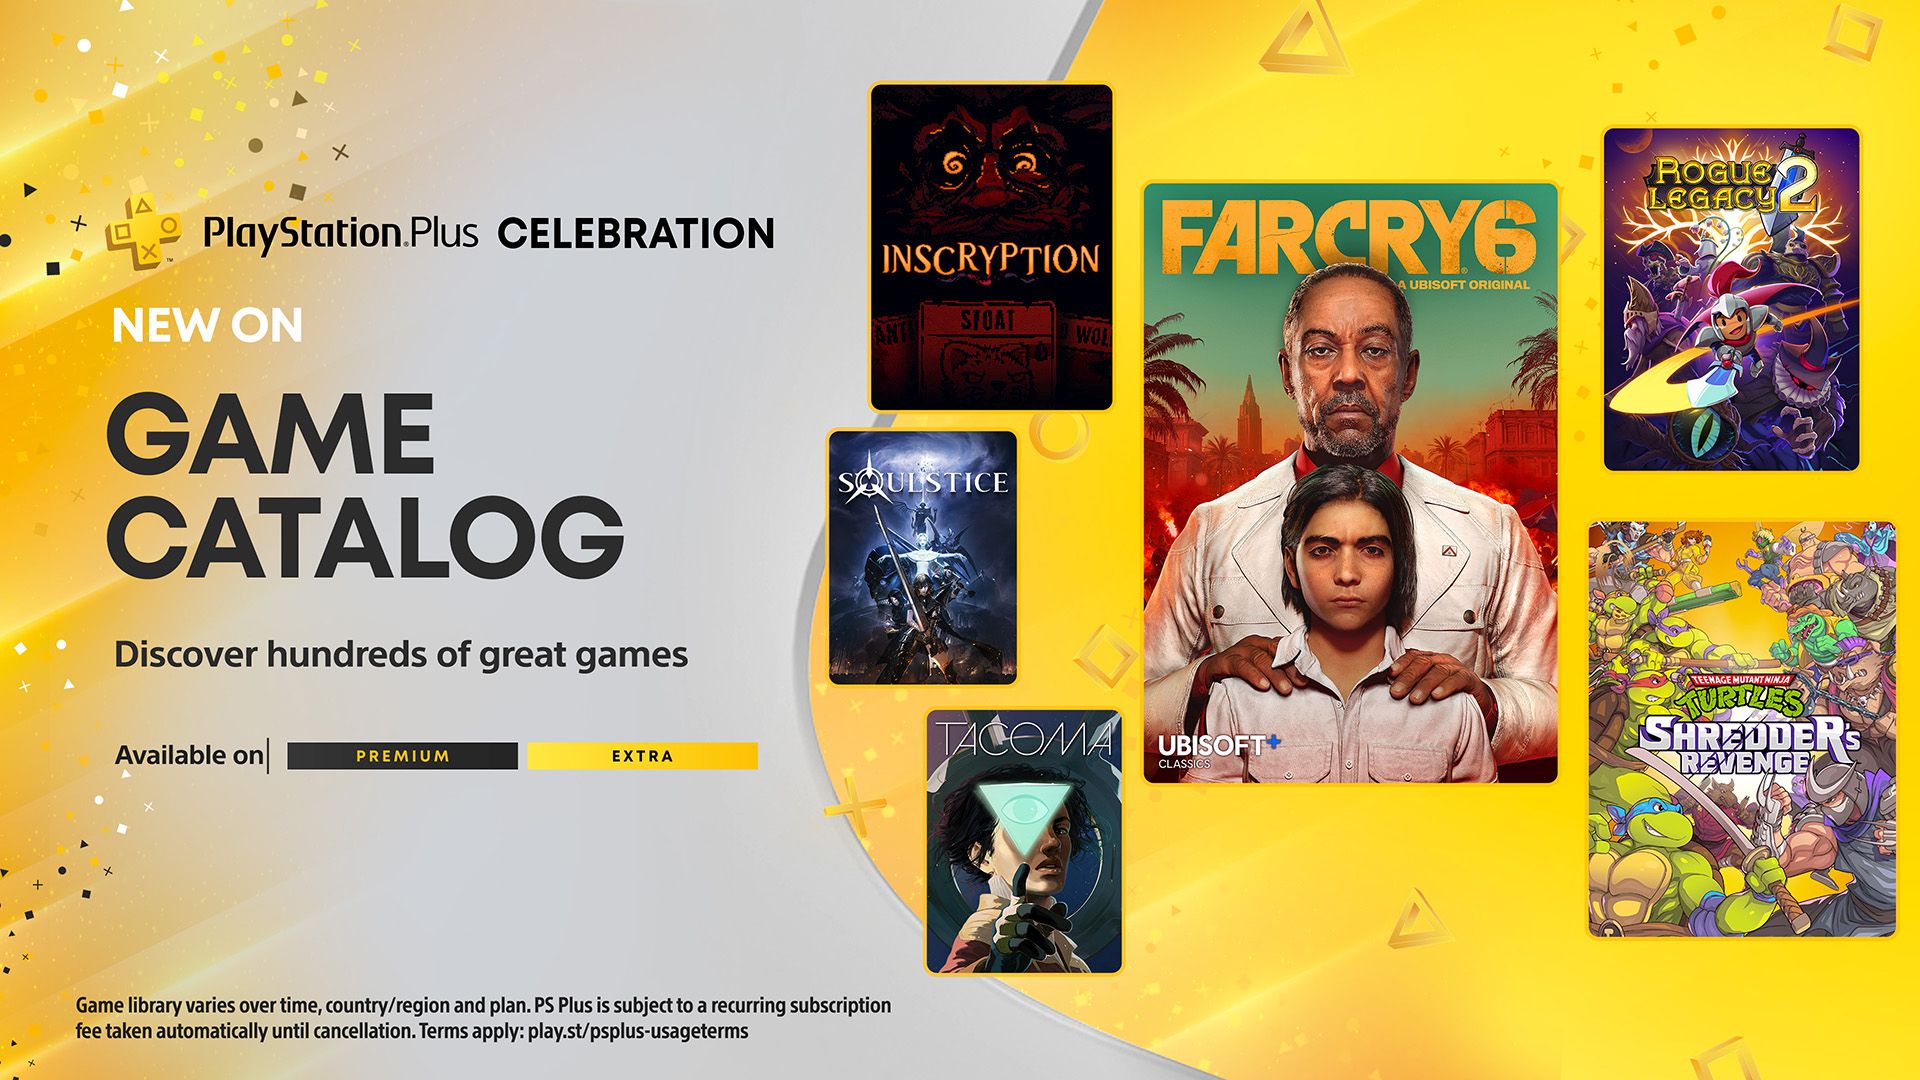 Far Cry 6, Rogue Legacy 2, Inscryption and More Coming to PS Plus Extra/Premium Next Week